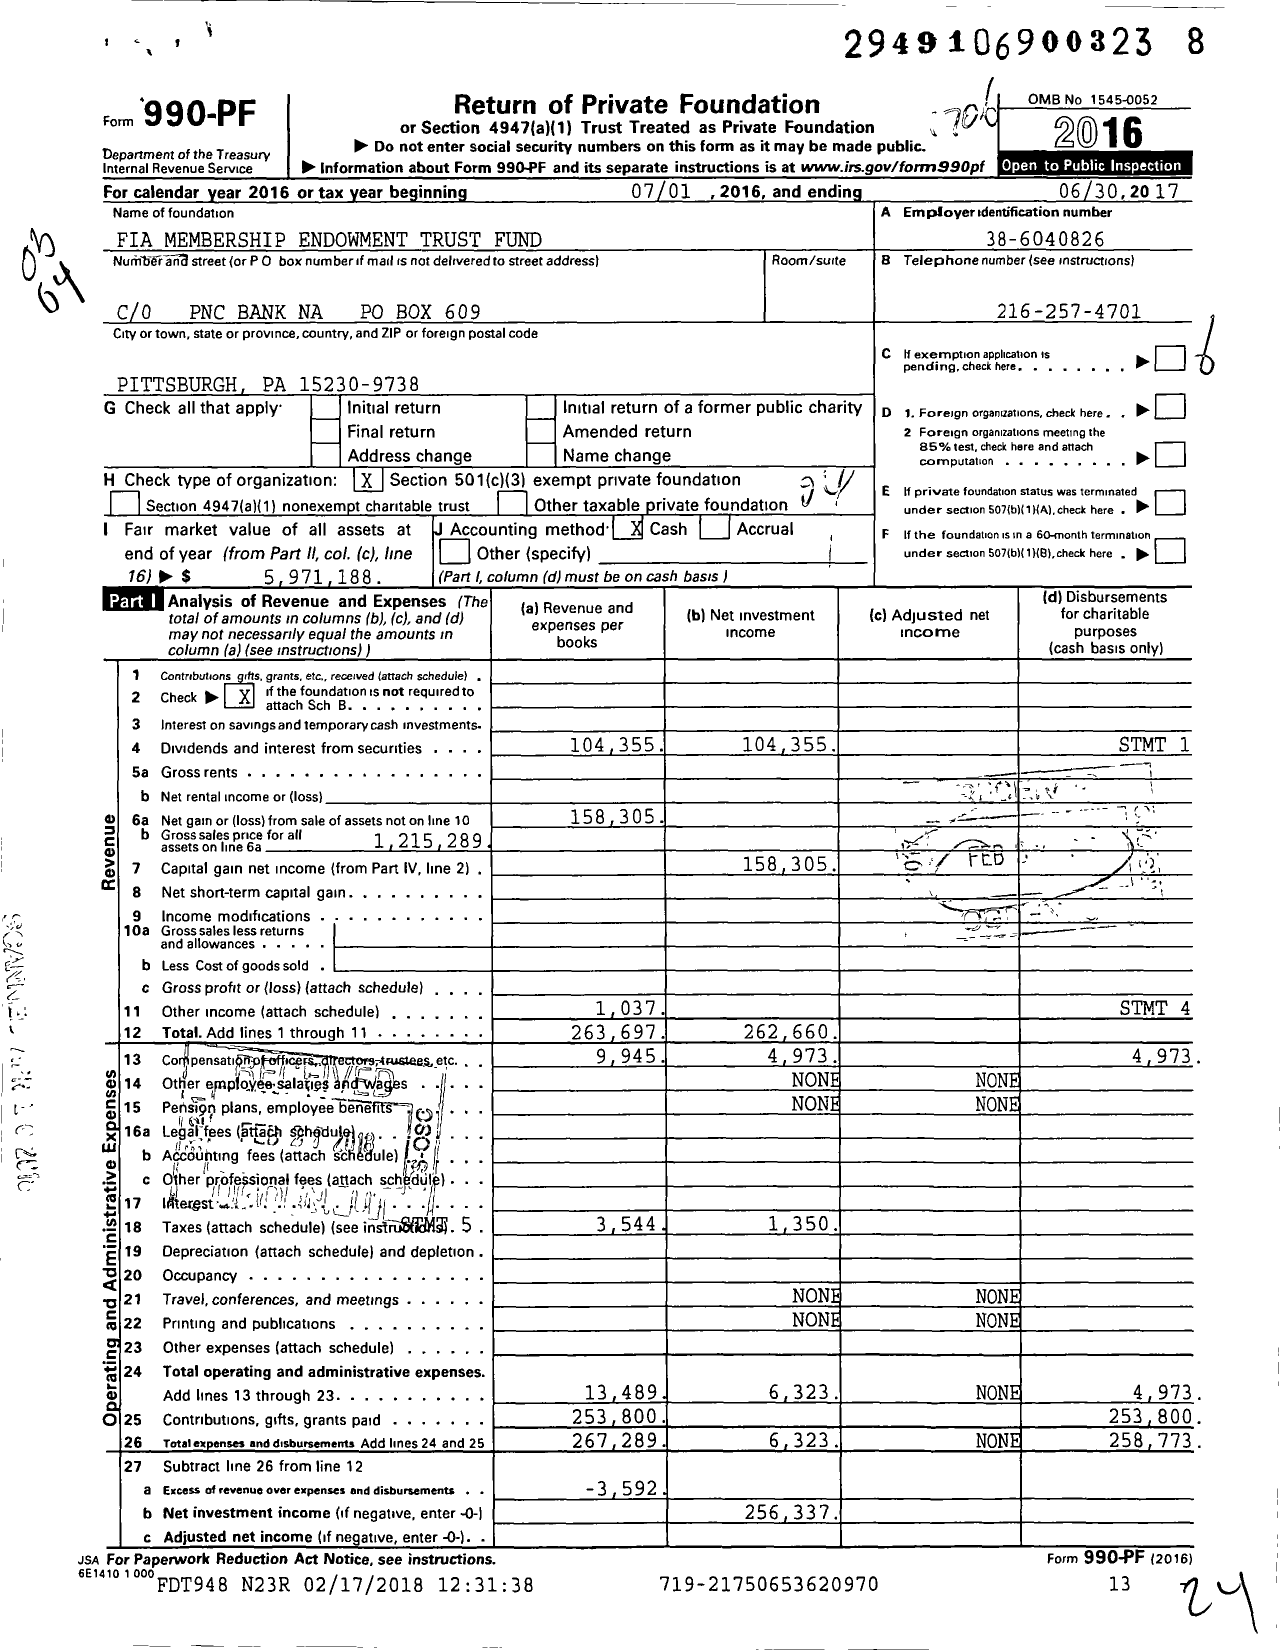 Image of first page of 2016 Form 990PF for Fia Membership Endowment Trust Fund